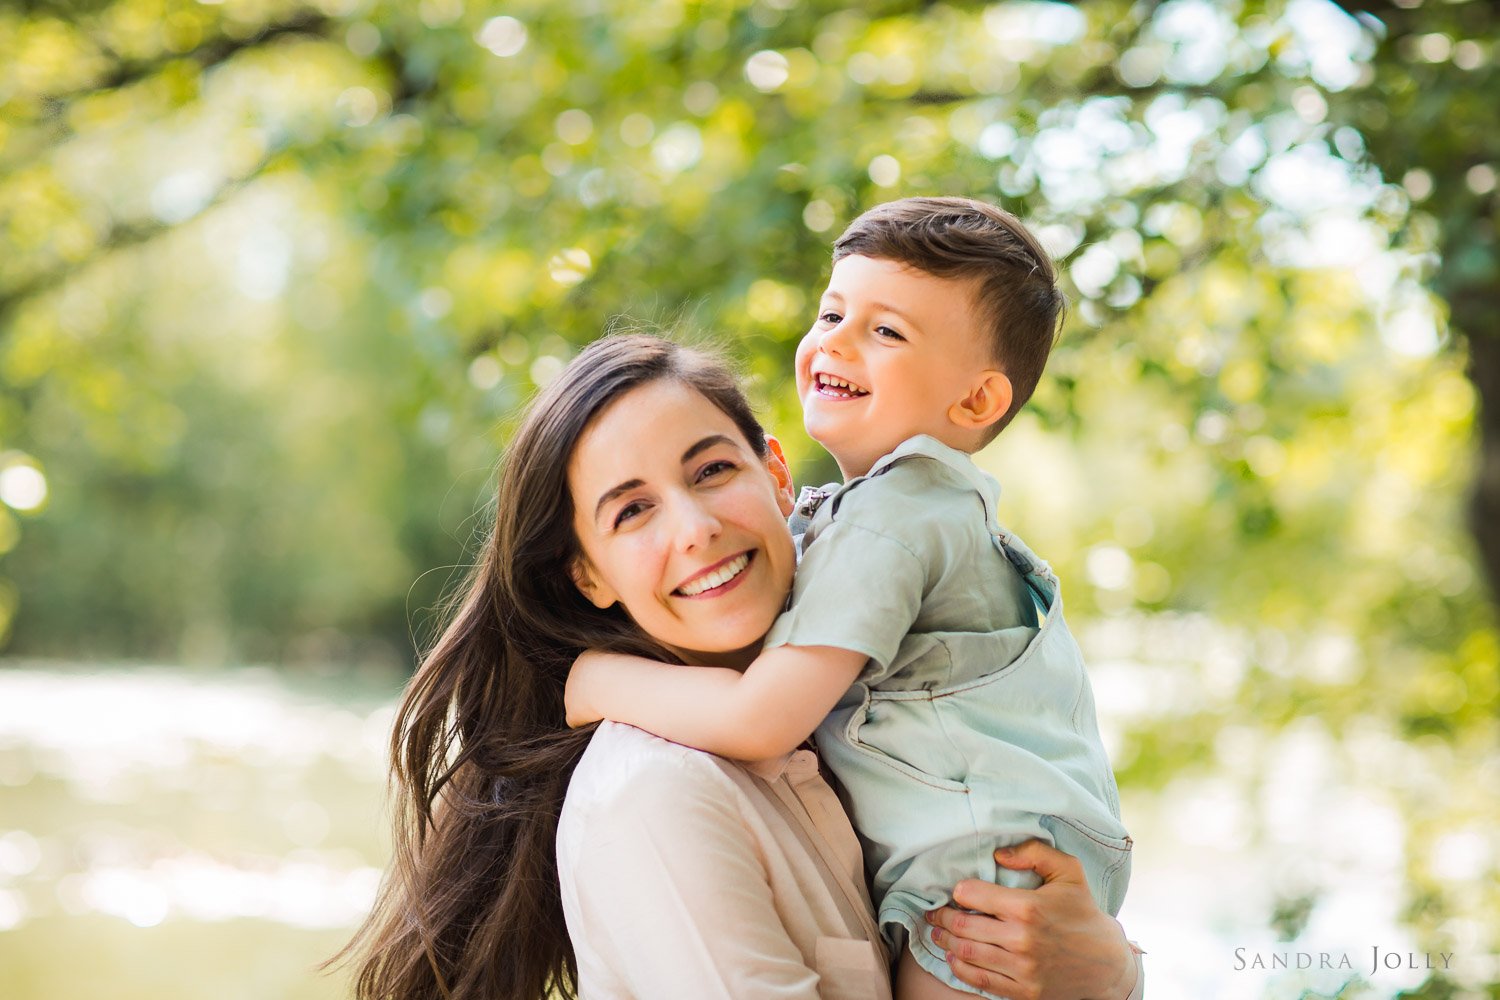 beautiful-mom-and-son-outdoor-summer-photo-session.jpg